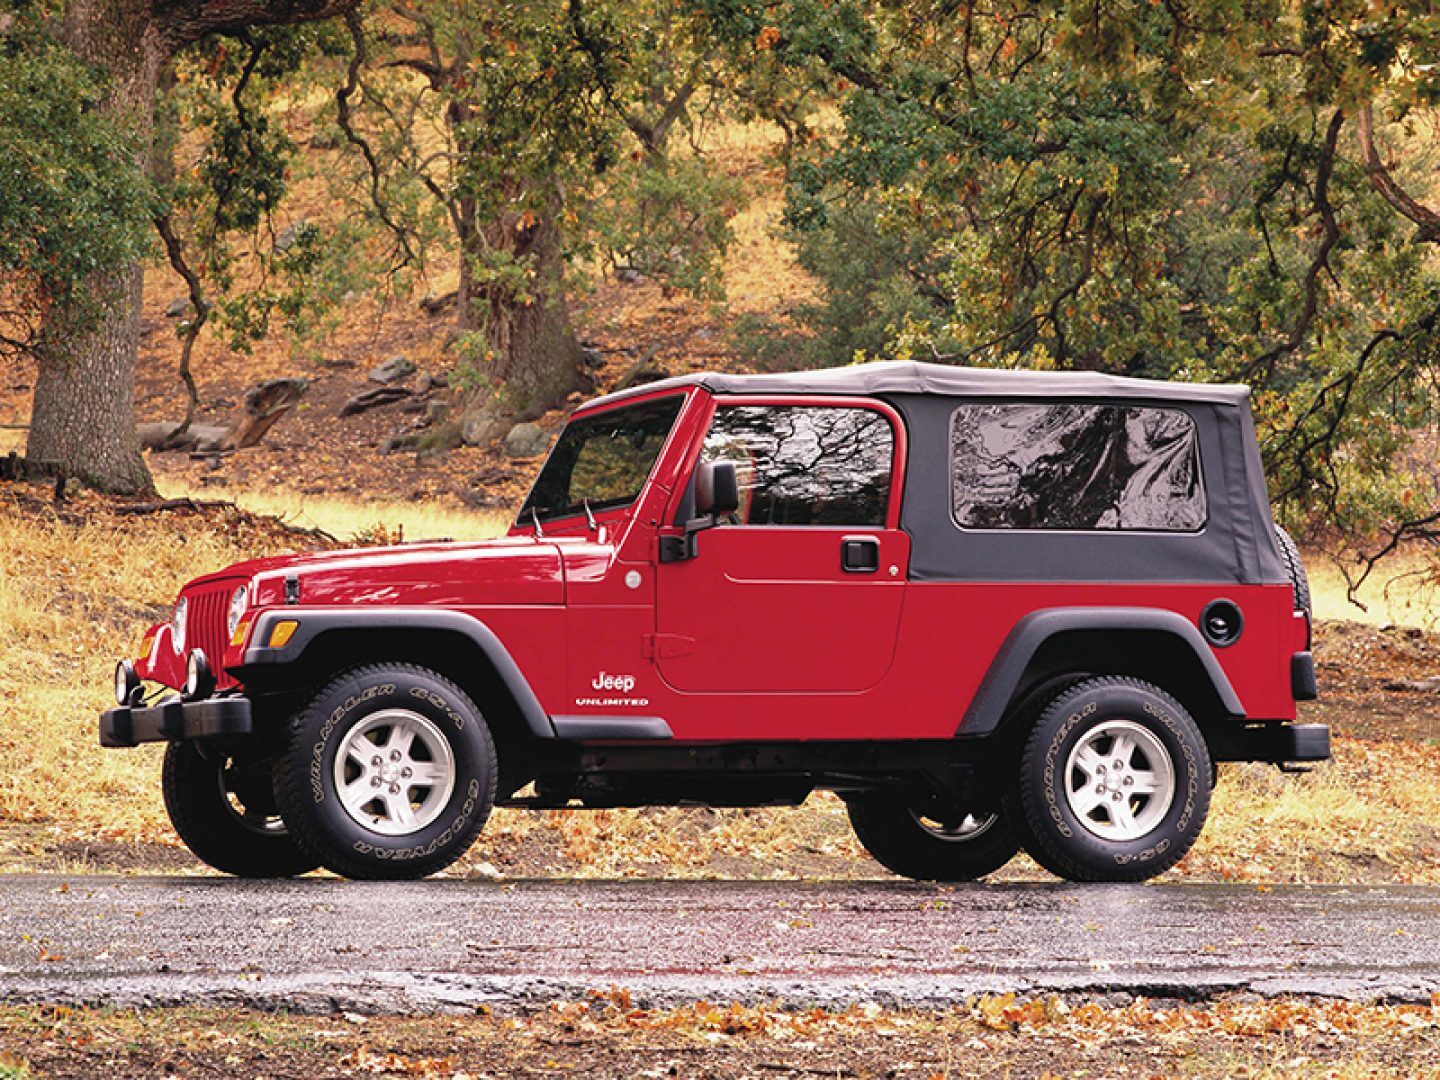 2000s - Jeep History | The Story Of The Legend | Jeep® UK